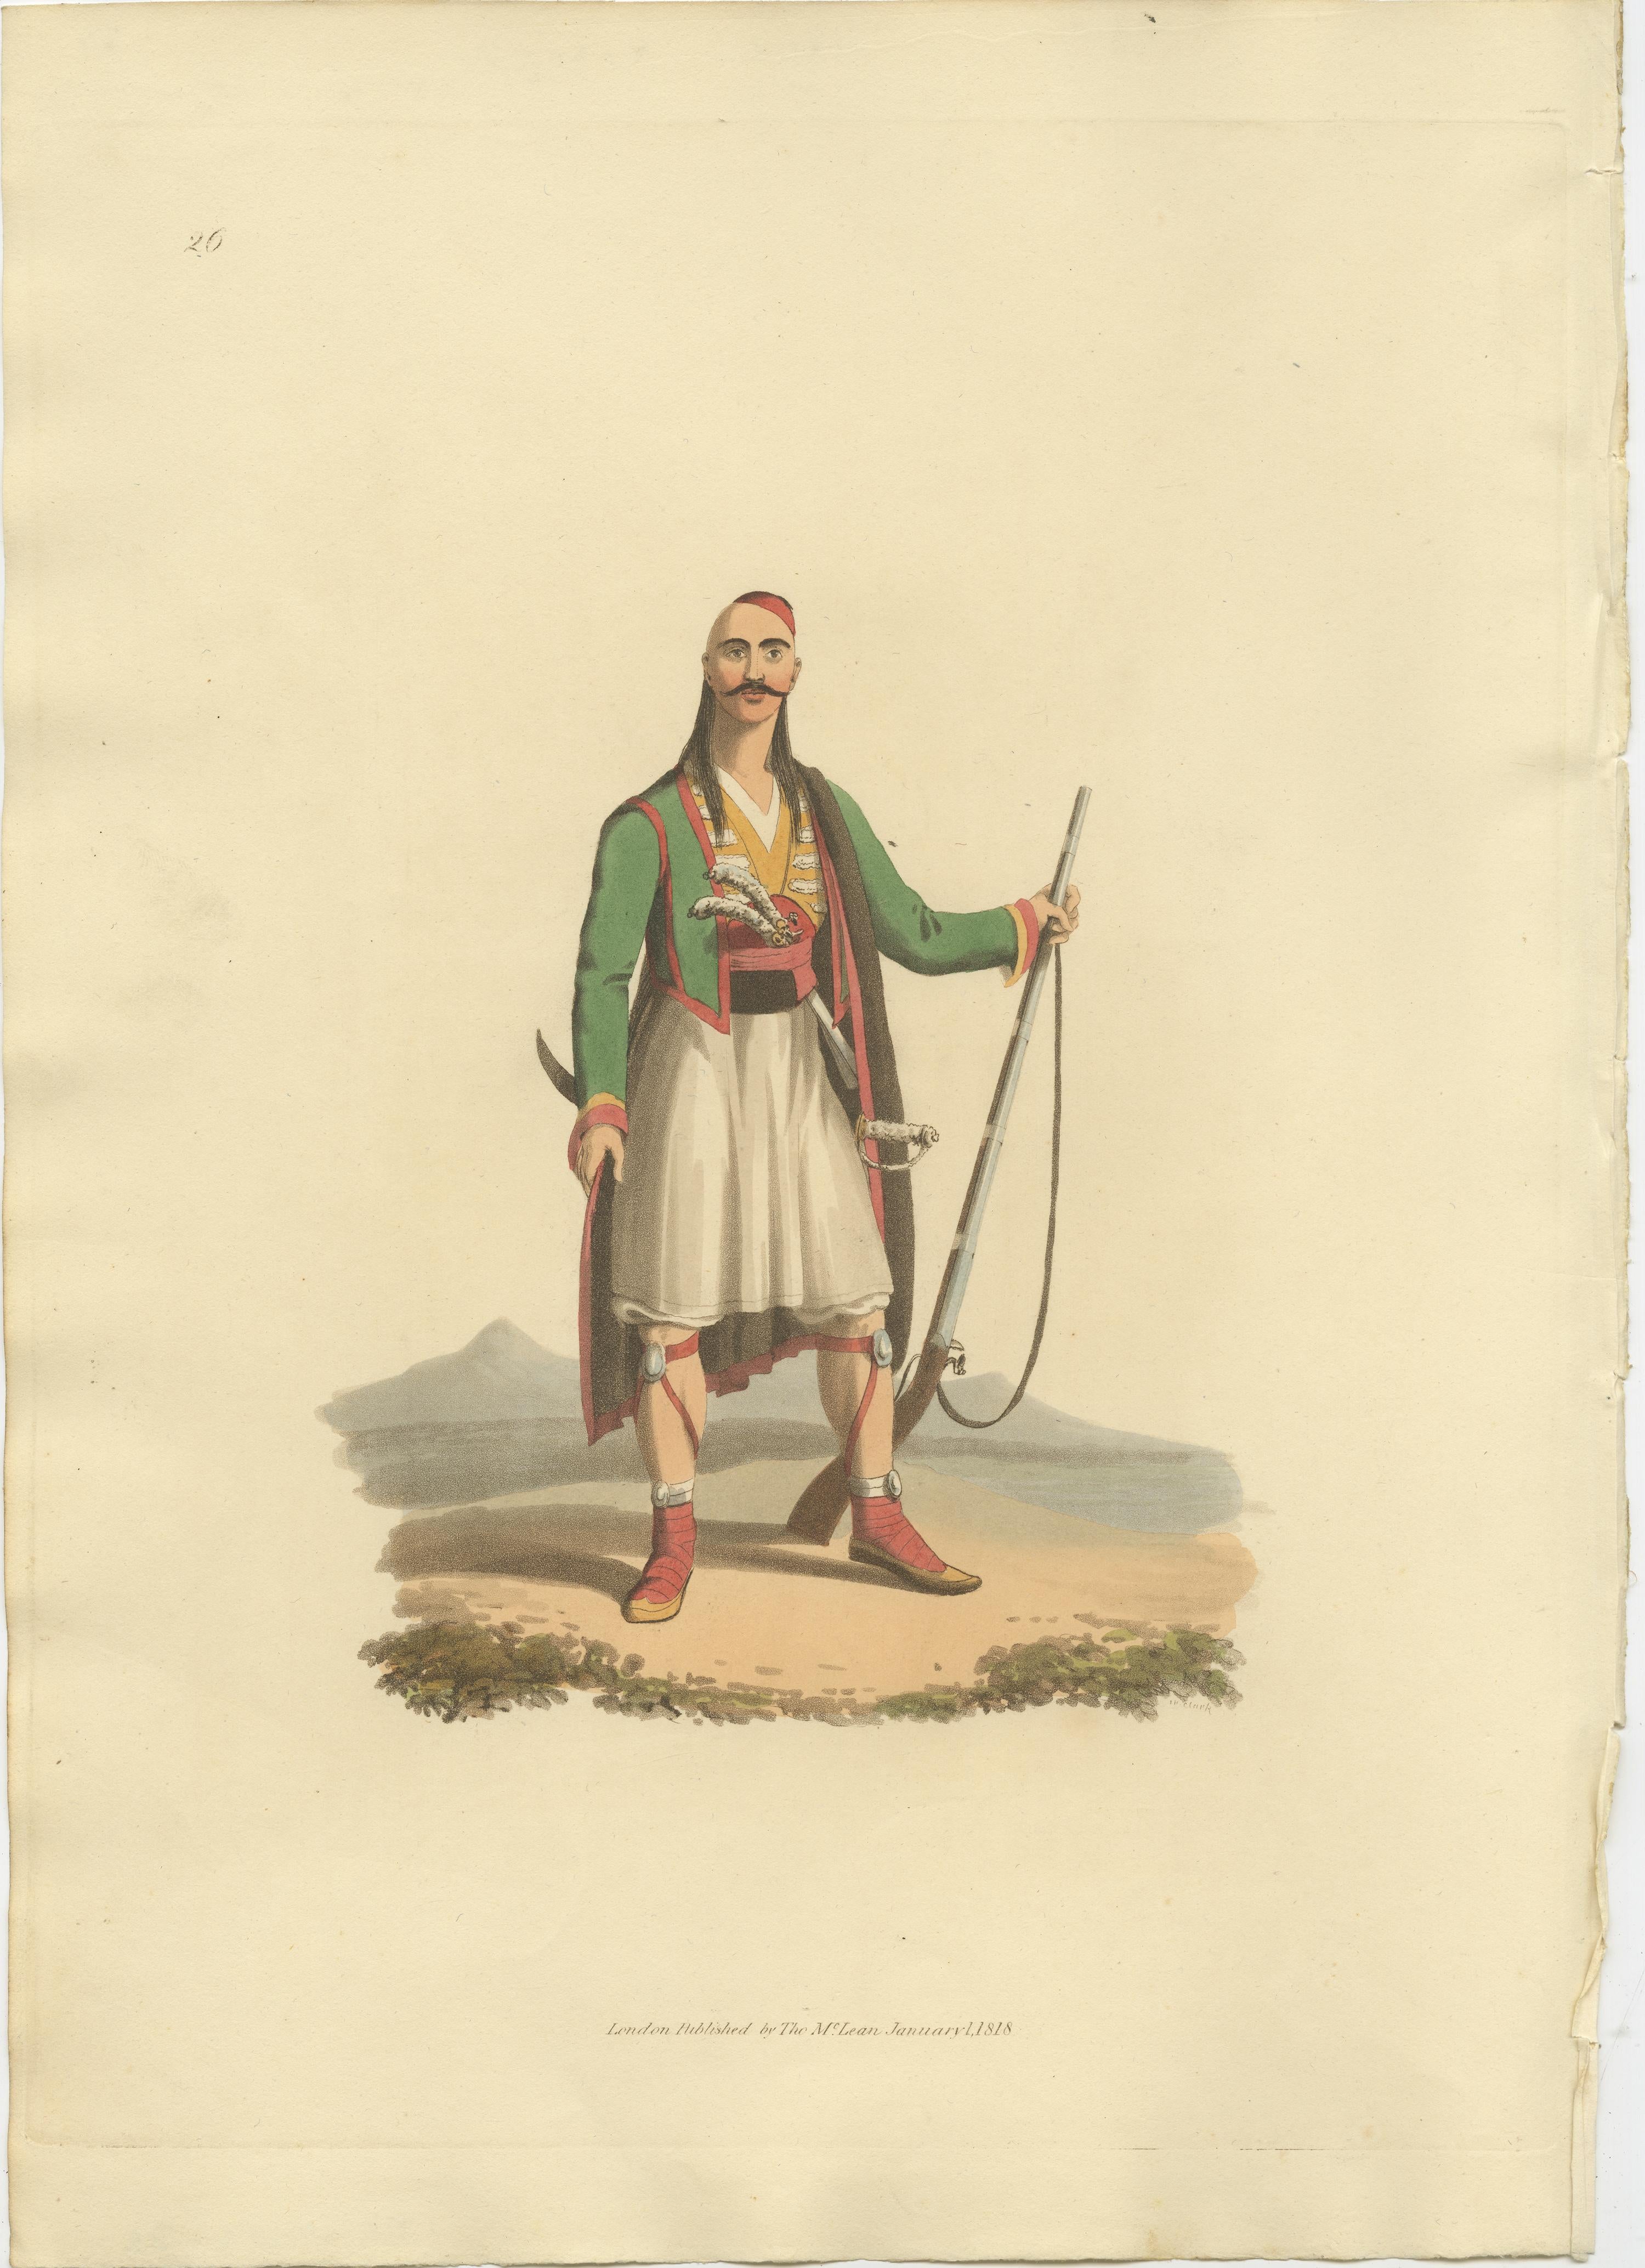 From: The Military Costume of Turkey, first published by Thomas McLean 
Drawing by Octavien Dalvimart (d'Alvimart), Engraved F.H. Clark

The originial text that goes with the print:


'The Albanian soldier entertains a very nice sense of honour; a